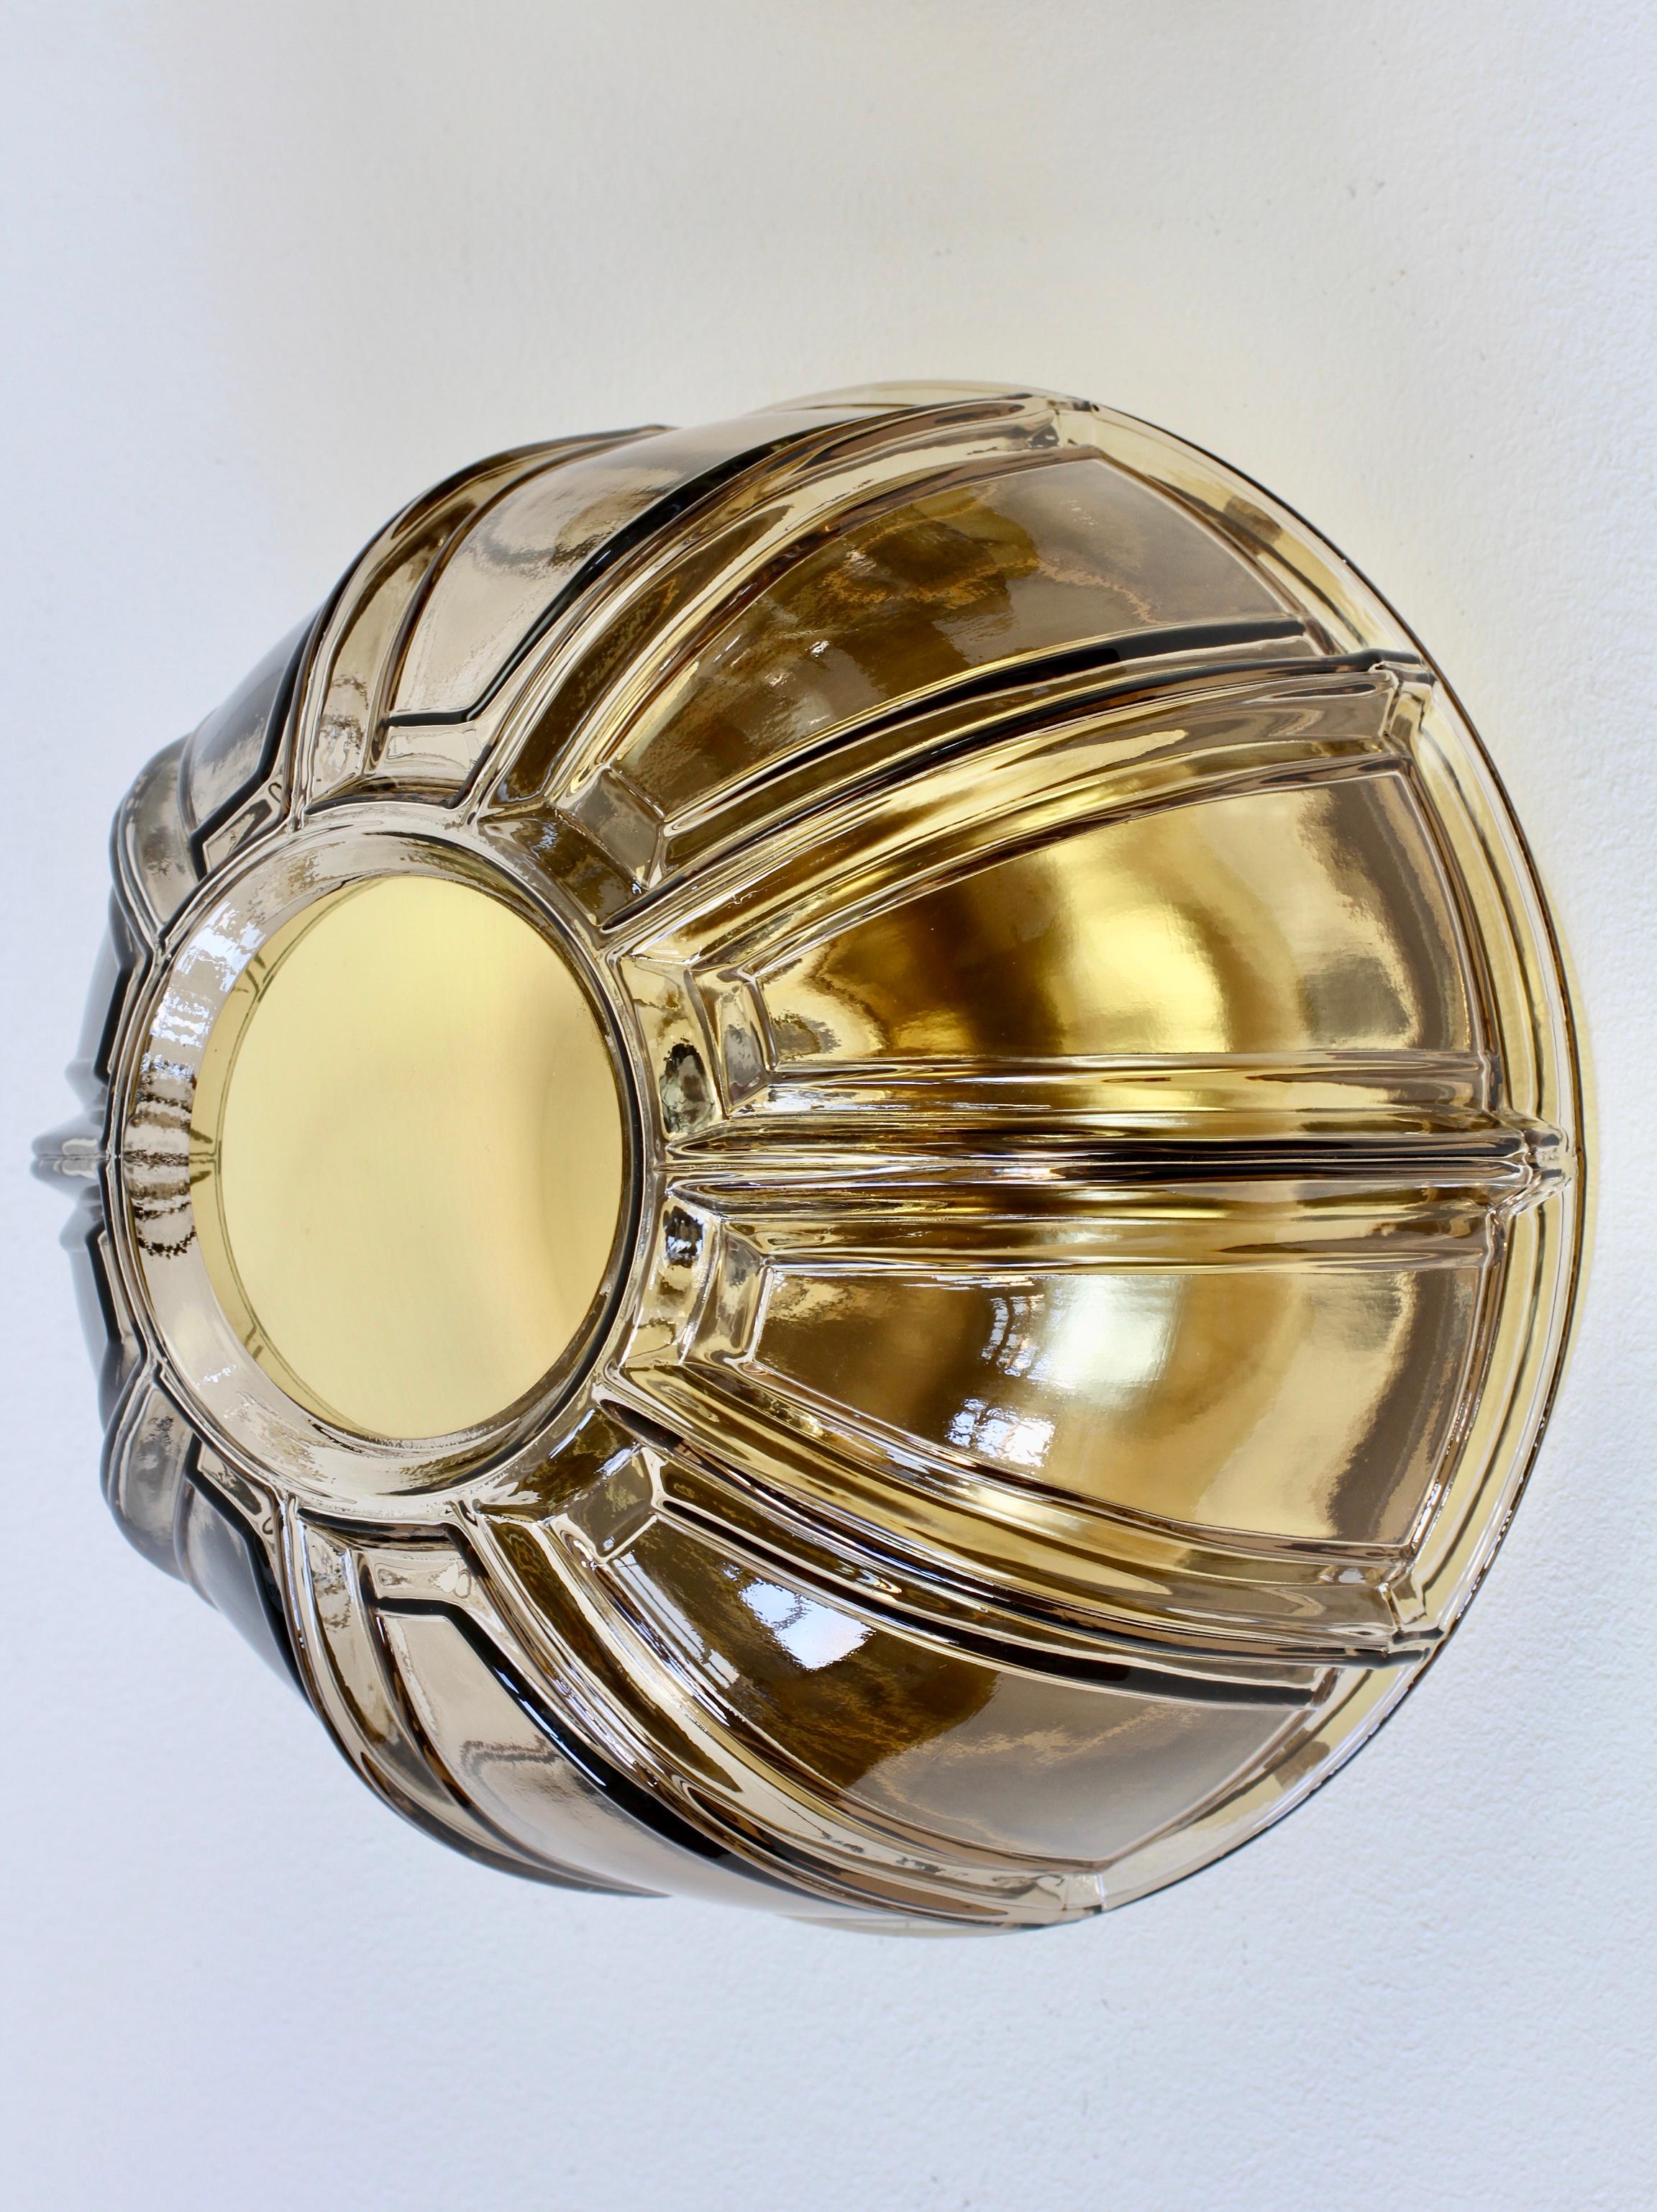 Polished Limburg Pair of Topaz Toned Textured Glass Flush Mount Wall Lights or Sconces For Sale